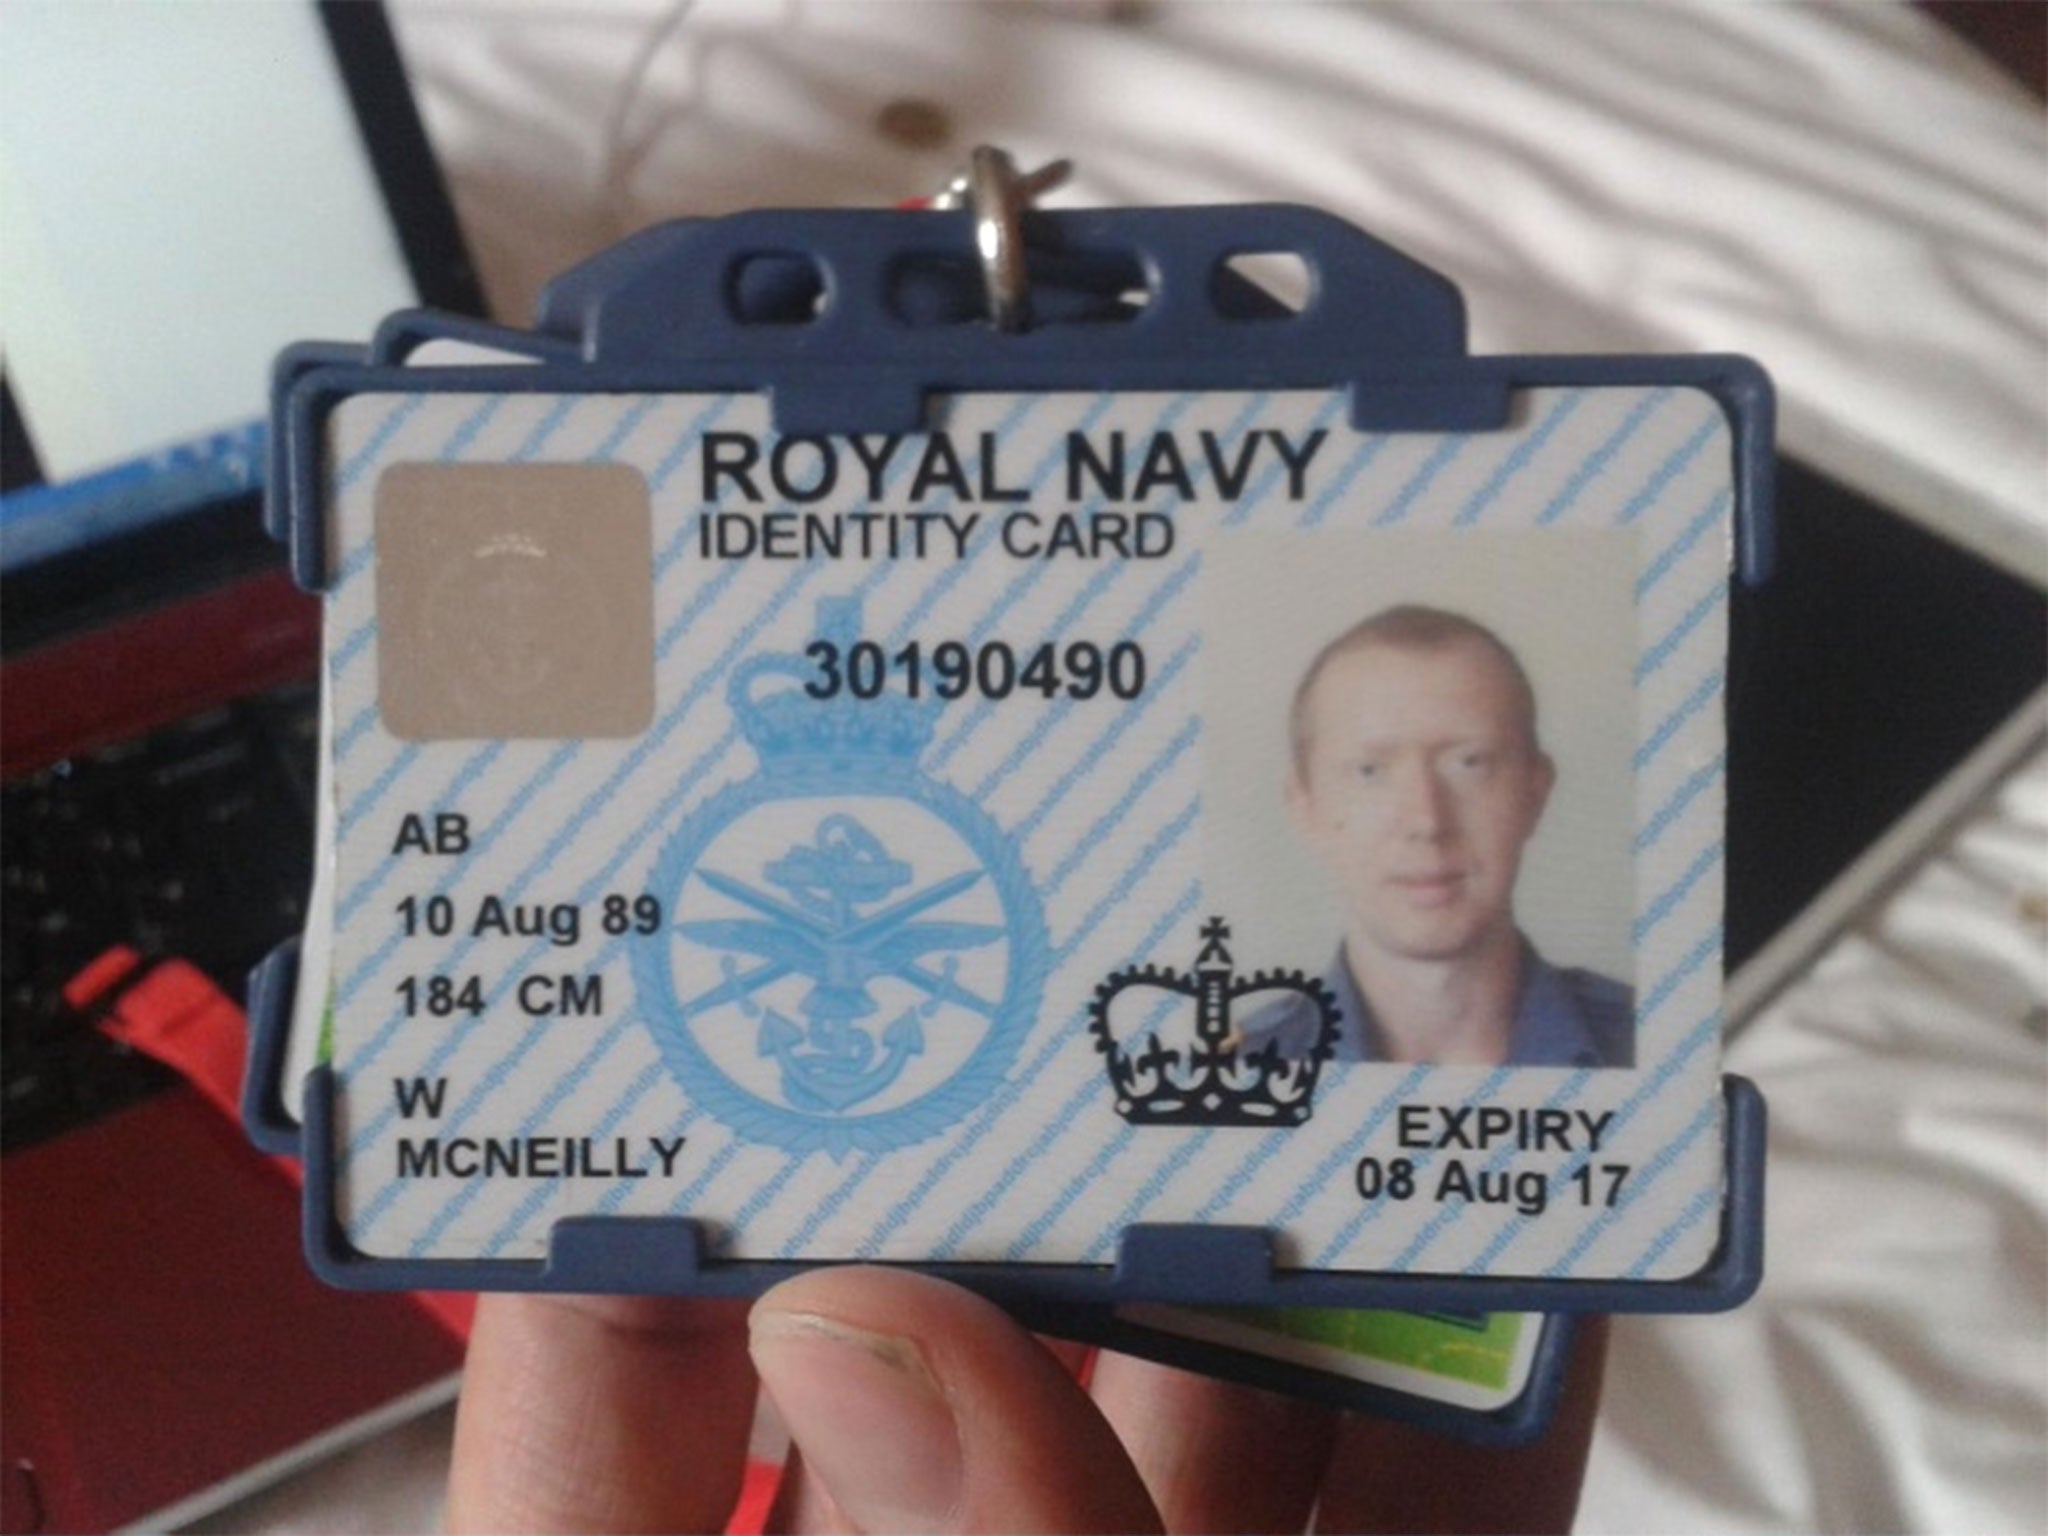 An image purporting to show Able seaman William McNeilly's Royal Navy ID card